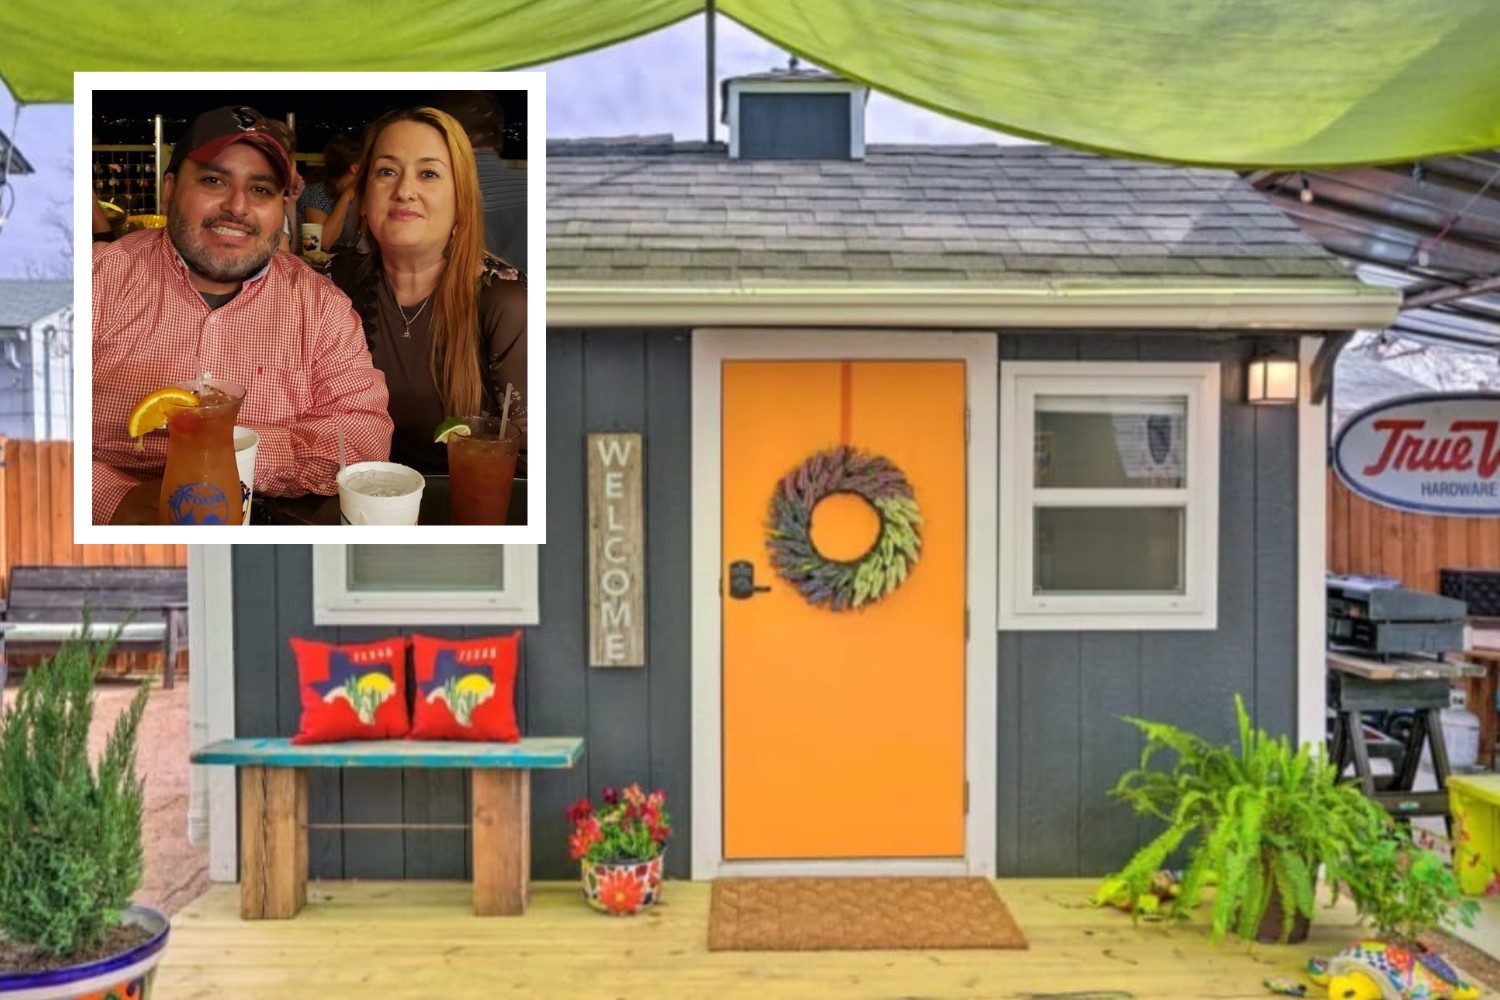 Man transforms shed off Craigslist into tiny home he rents for $74 a night